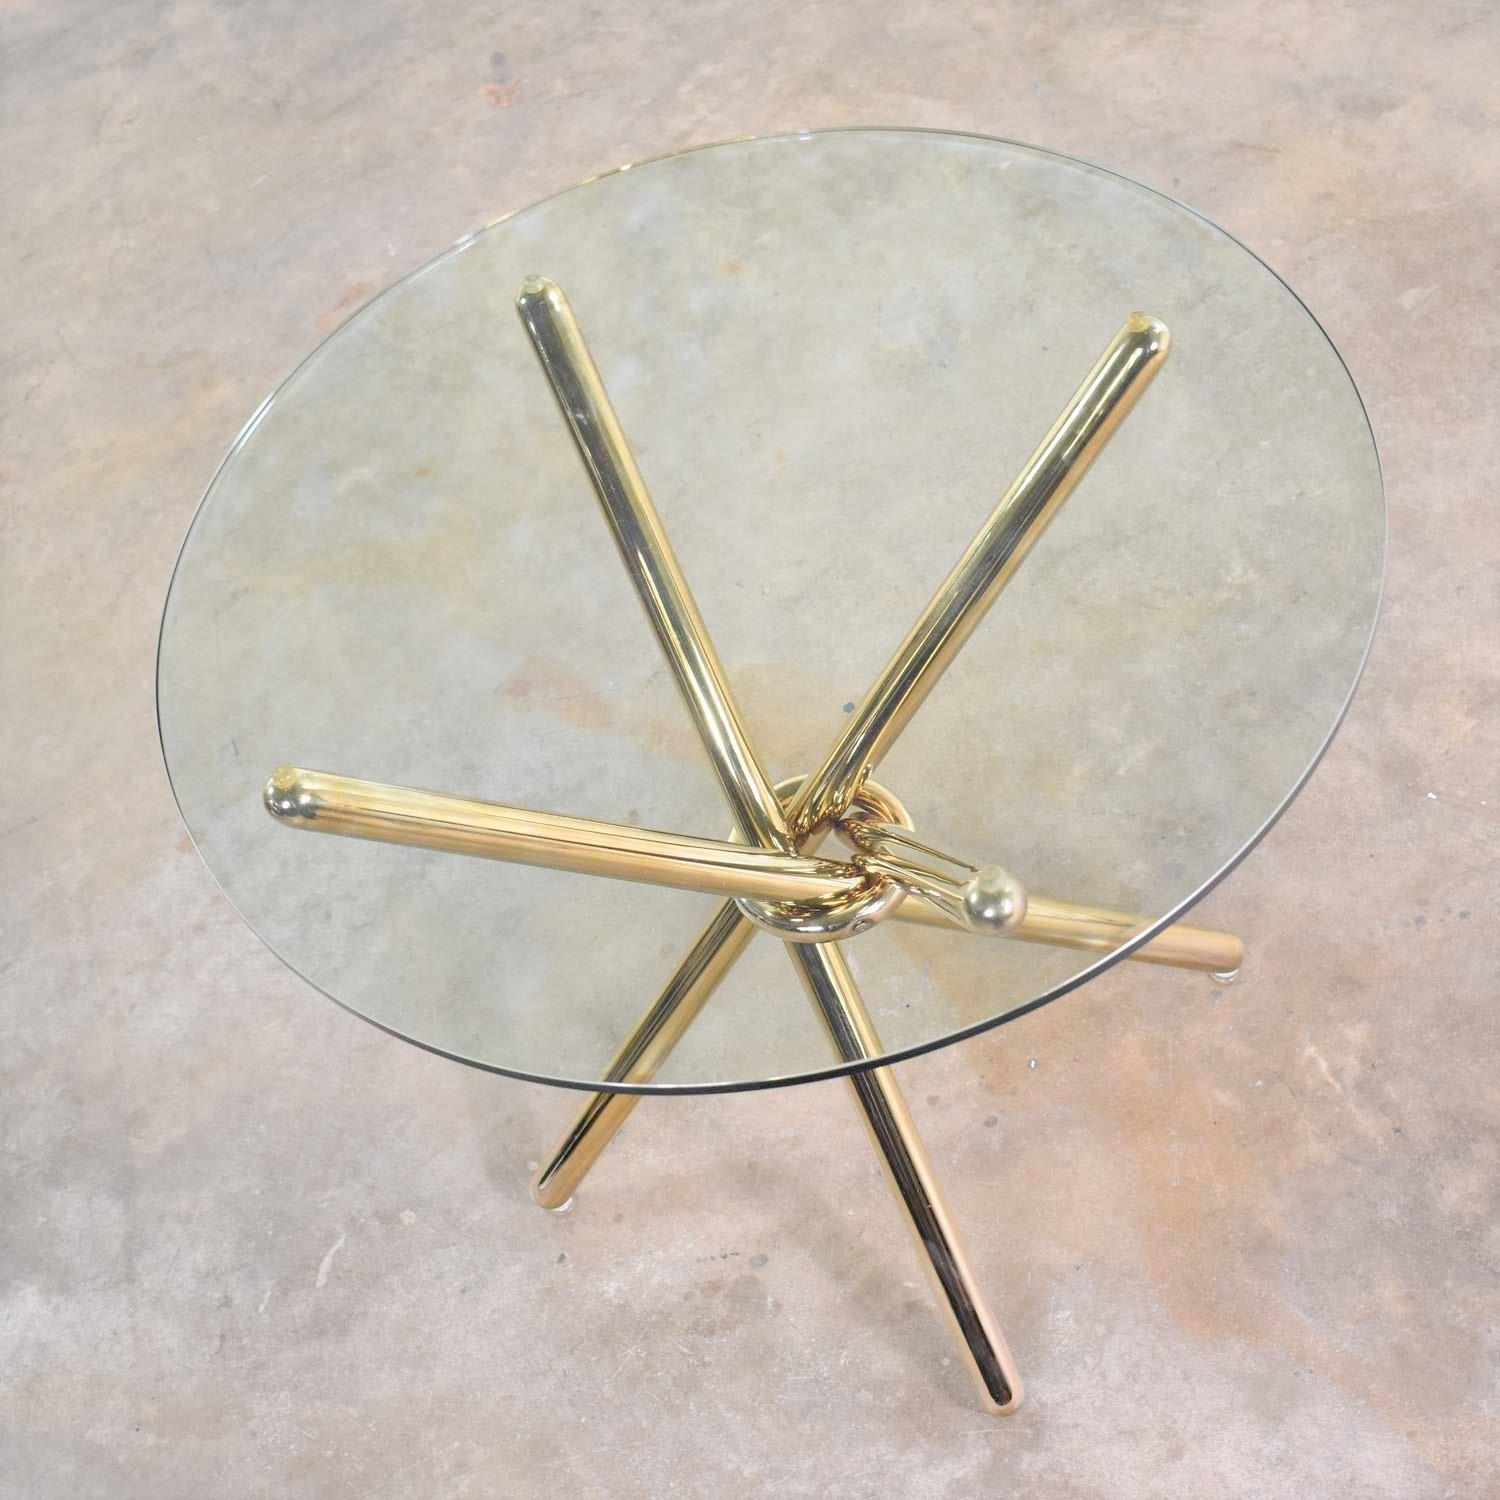 20th Century Vintage Modern Brass-Plated Jax Center or End Table with Round Glass Top